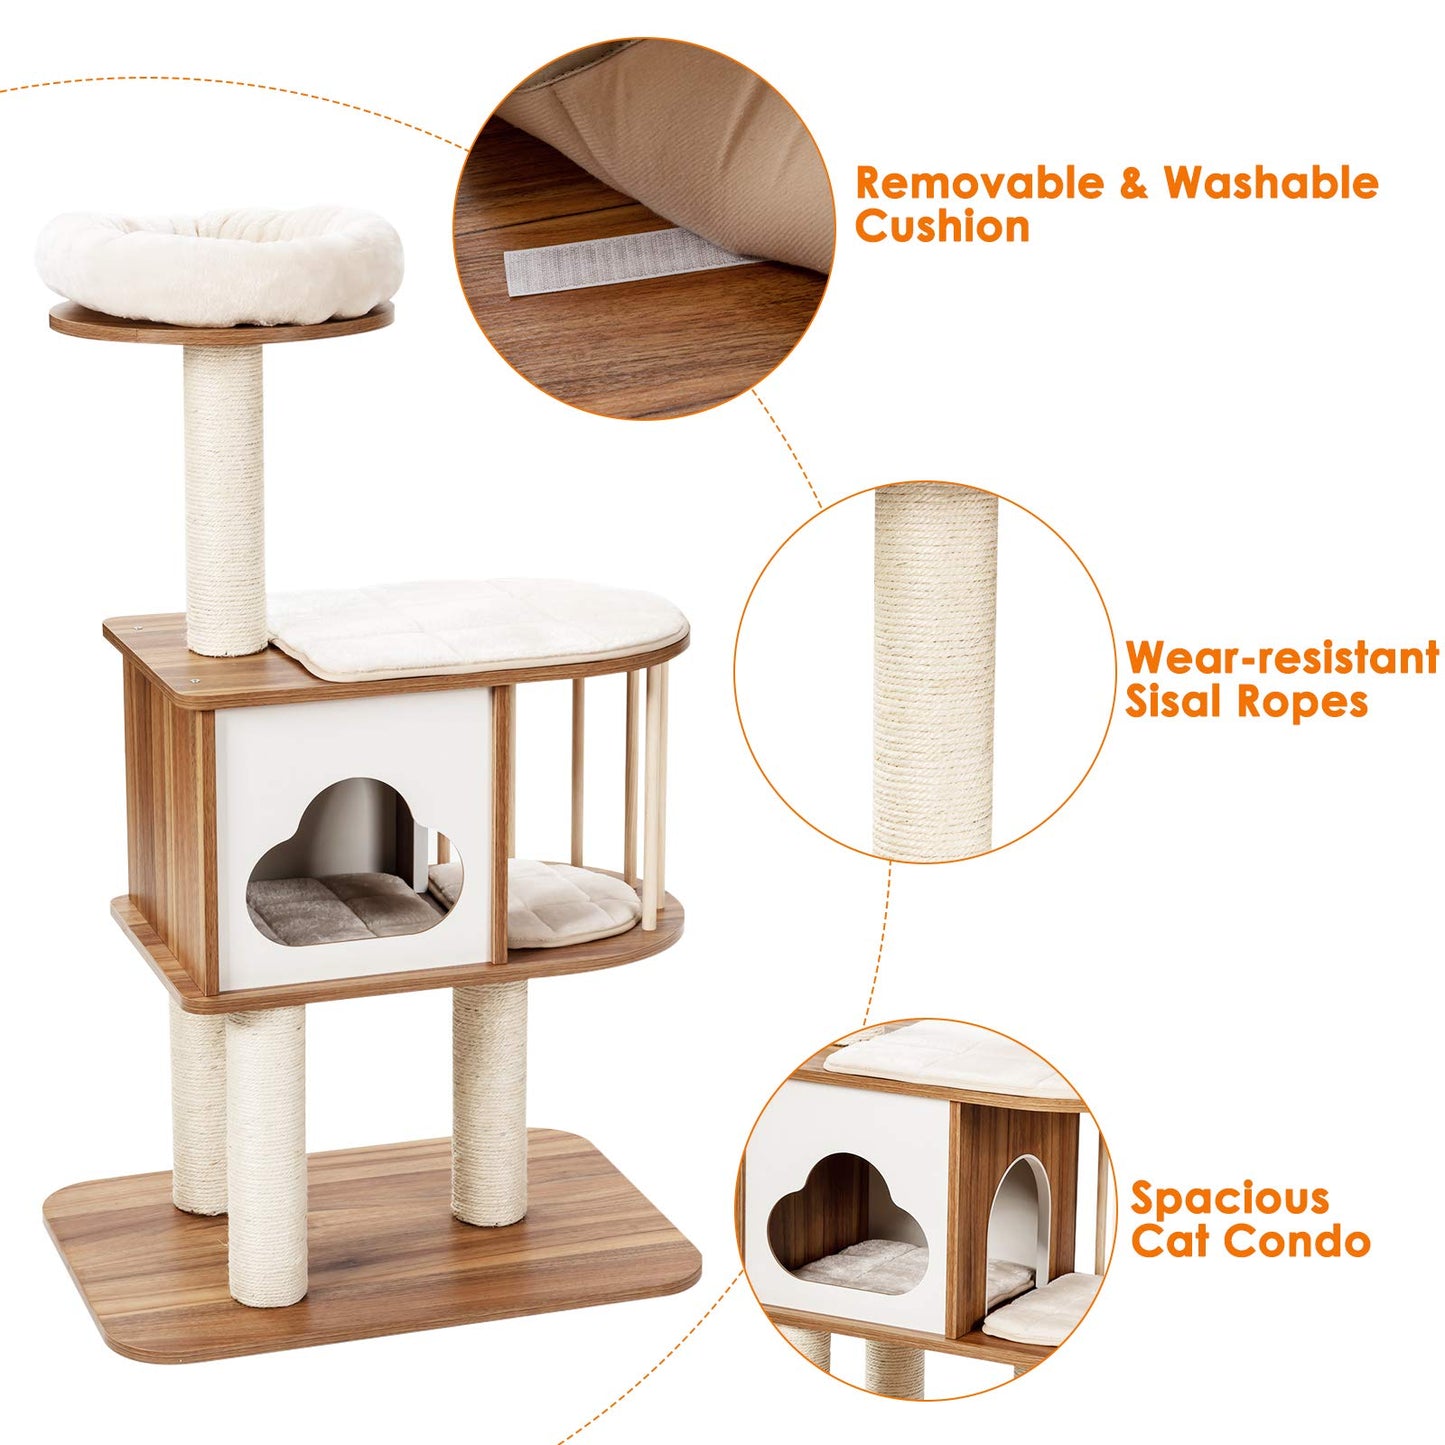 Tangkula Modern Wood Cat Tree, 46 Inches Cat Tower with Platform, Cat Activity Center with Scratching Posts and Washable Cushions, Wooden Cat Condo Furniture for Kittens and Cats (Natural)